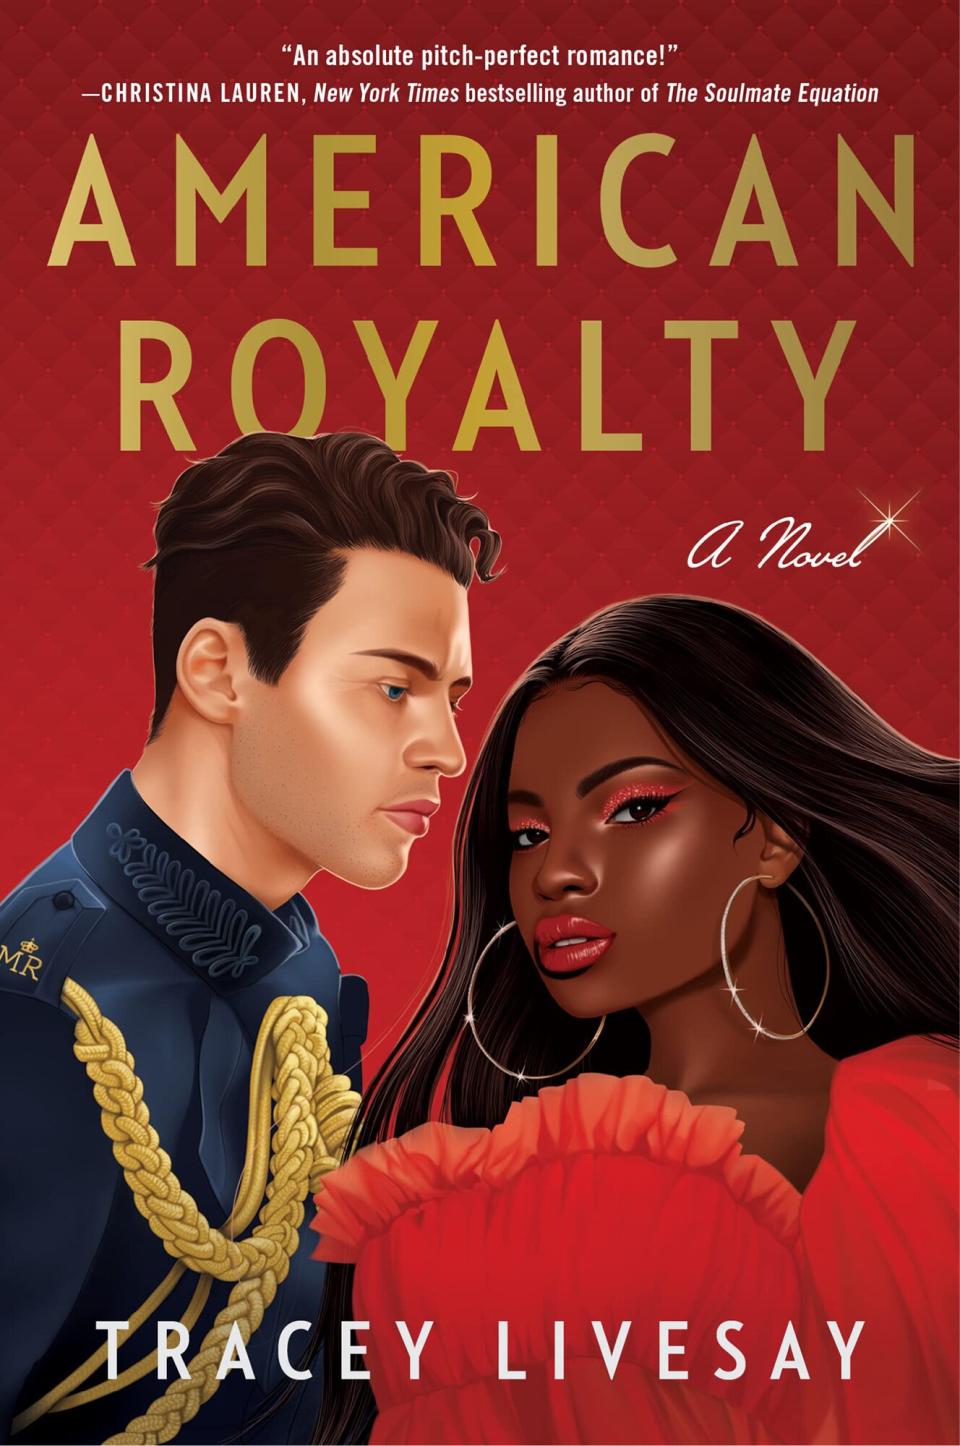 American Royalty: A Novel Paperback – June 28, 2022 by Tracey Livesay